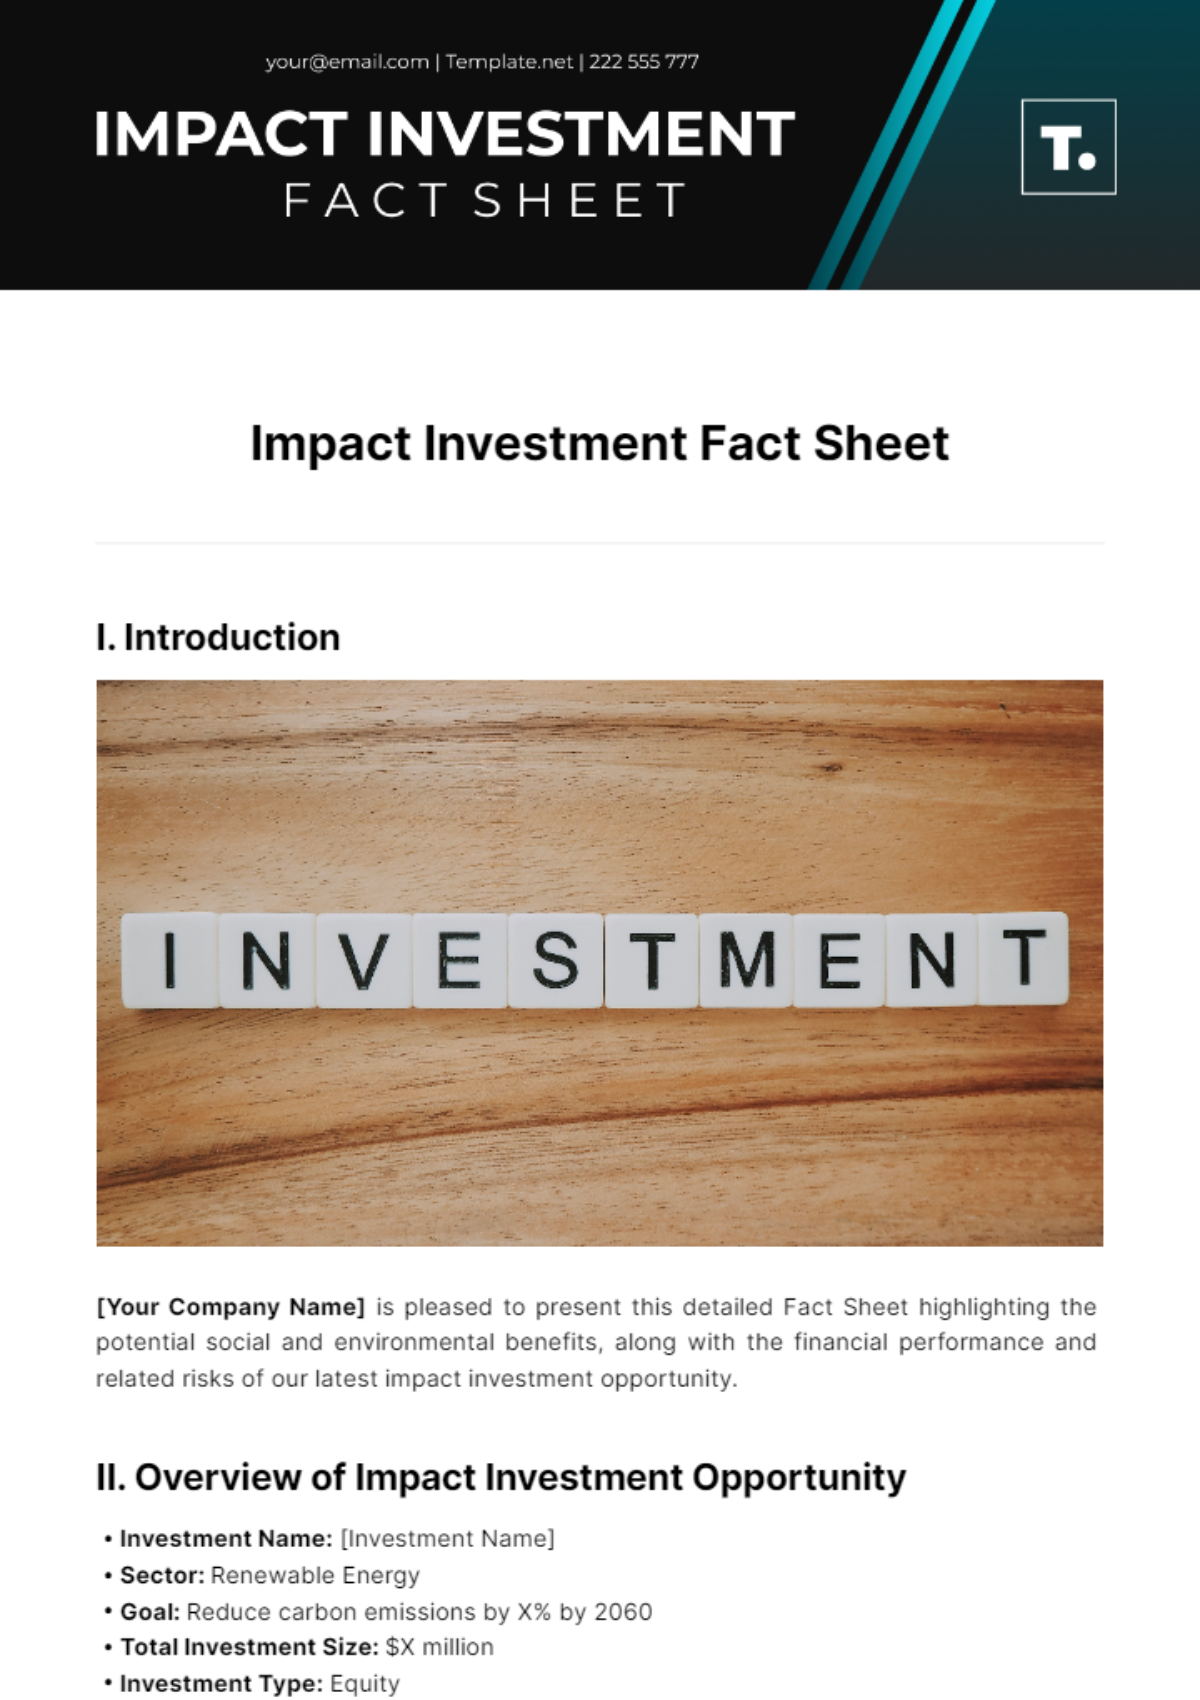 Impact Investment Fact Sheet Template